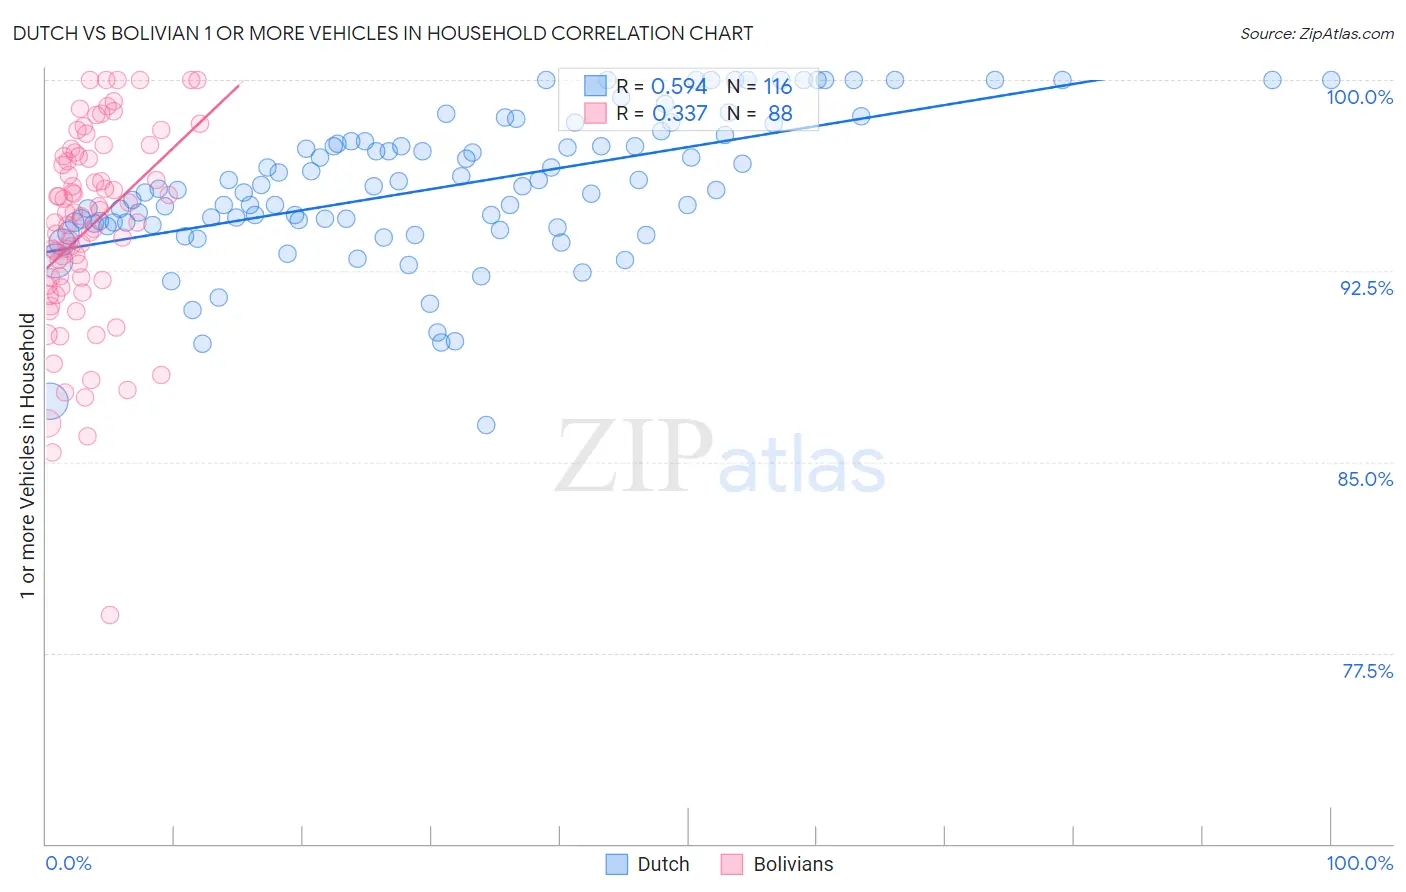 Dutch vs Bolivian 1 or more Vehicles in Household